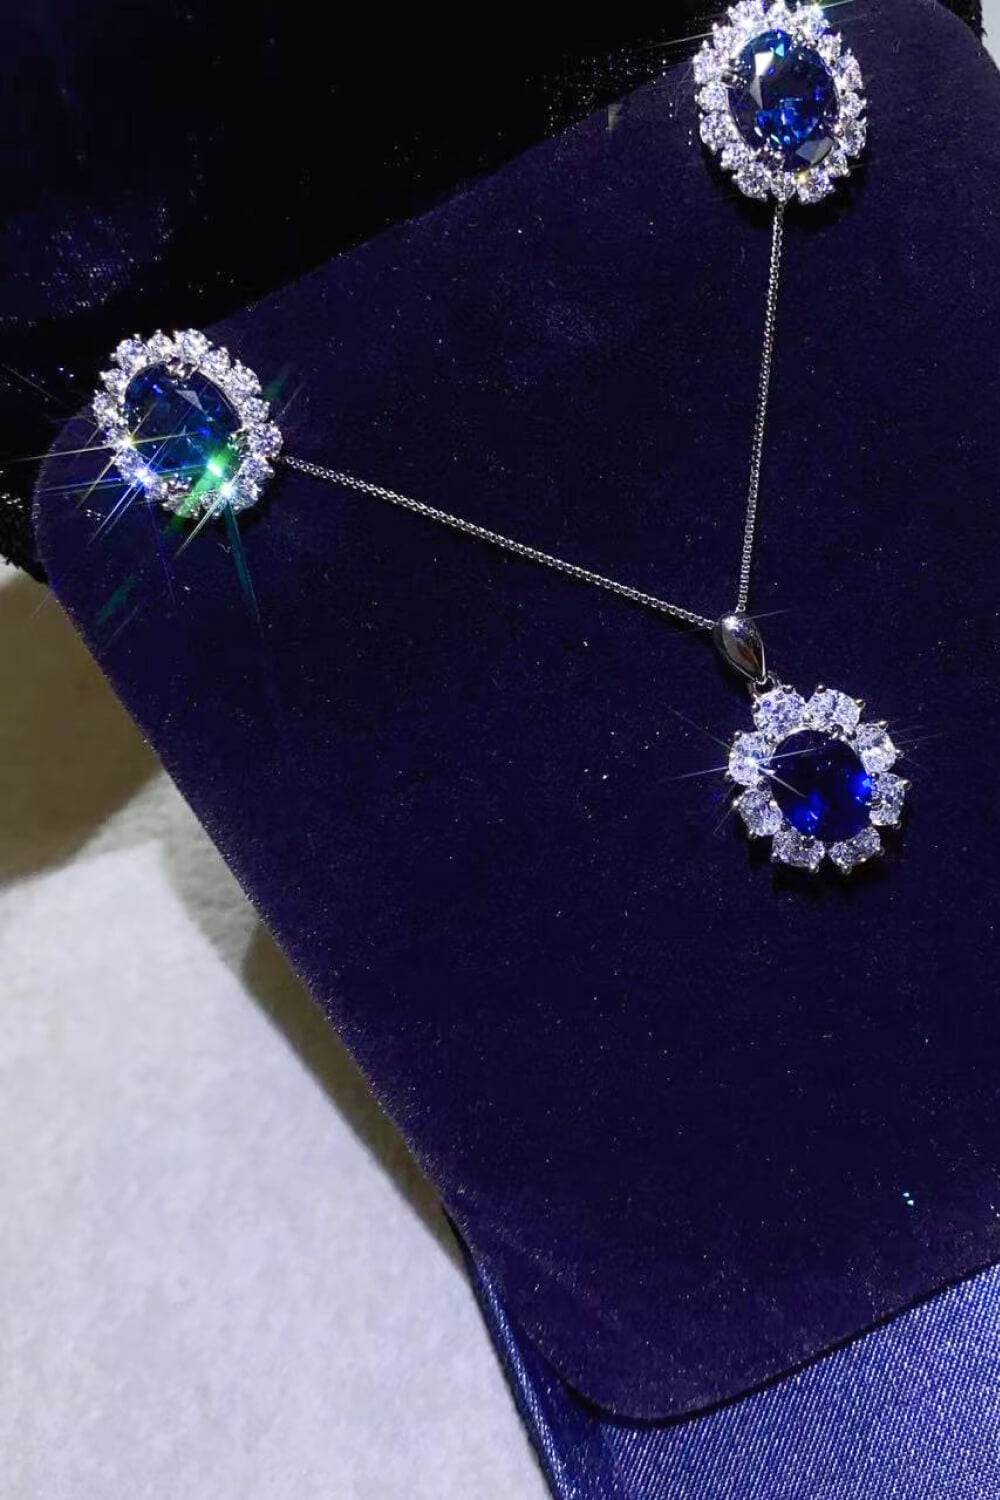 8 Carat Moissanite Earrings, Necklace, and Ring Set